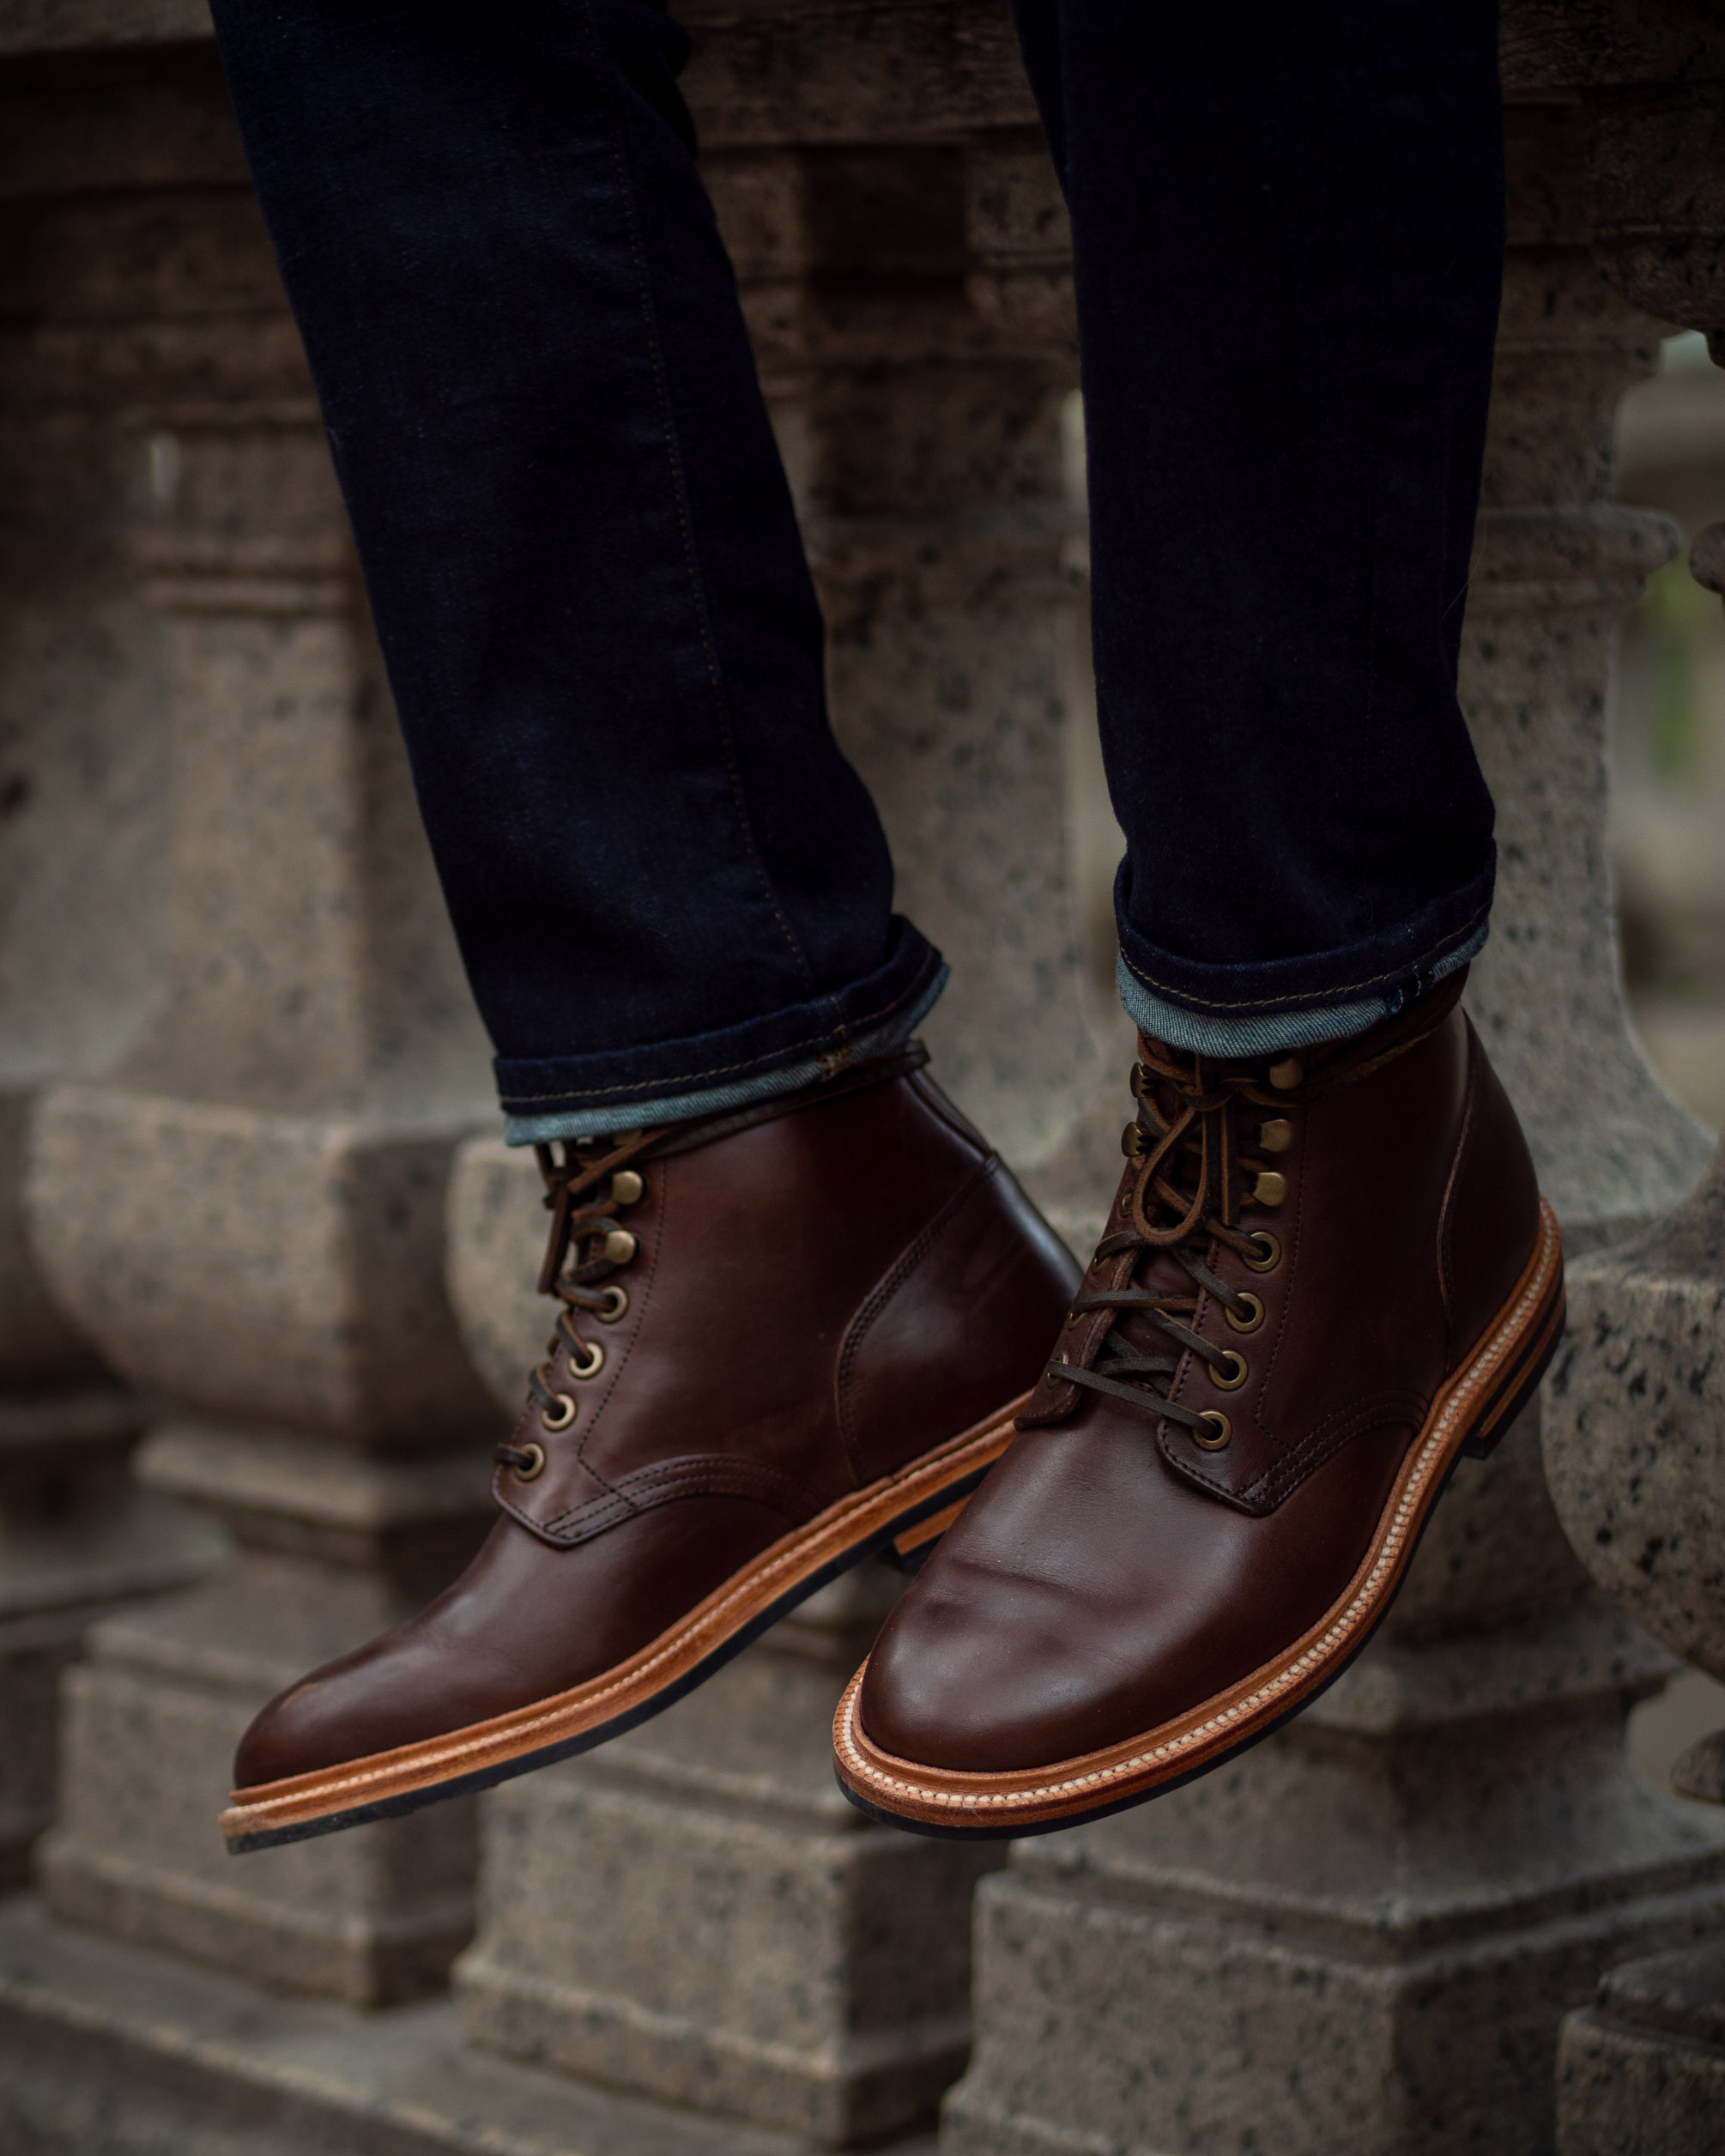 The 10 Best Fall Shoes for Men (2020 